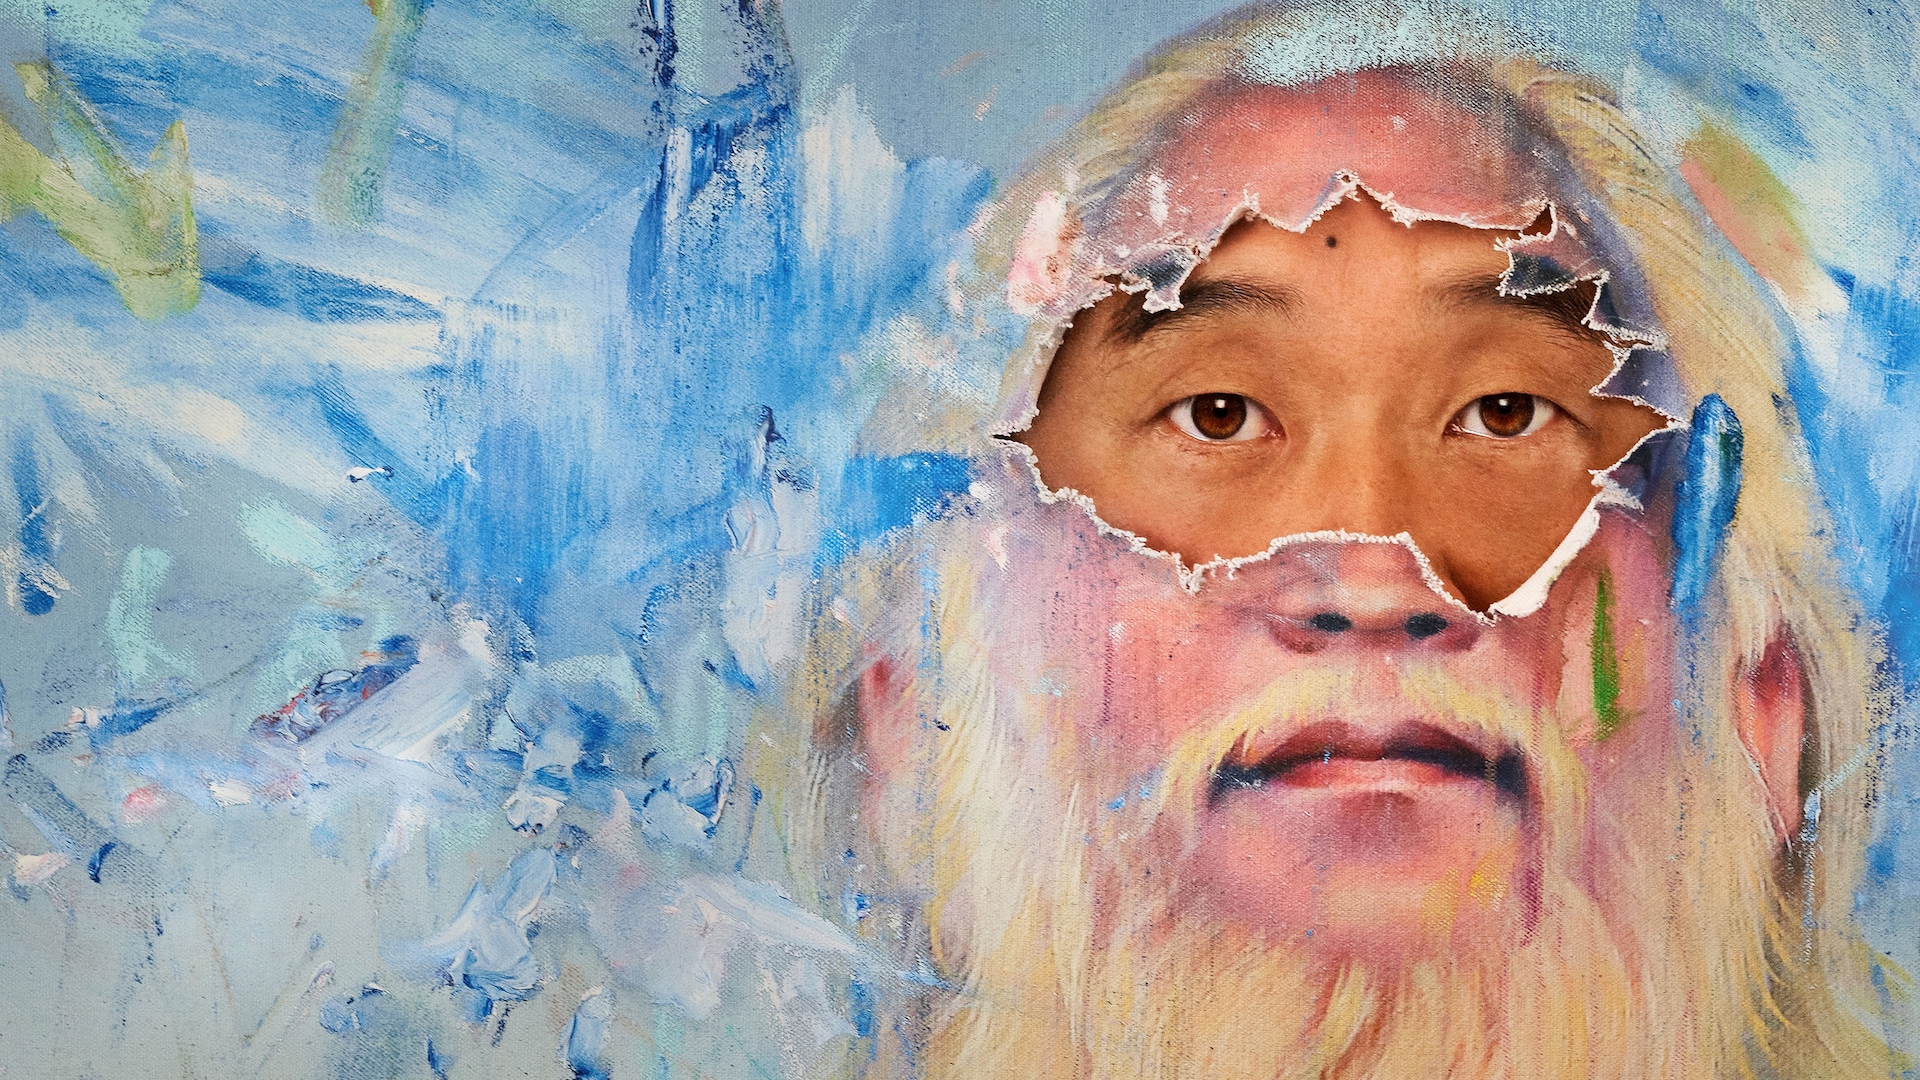 Self portrait painting of David Choe in a floral shirt and blue background with part of the canvas torn open to show his eyes